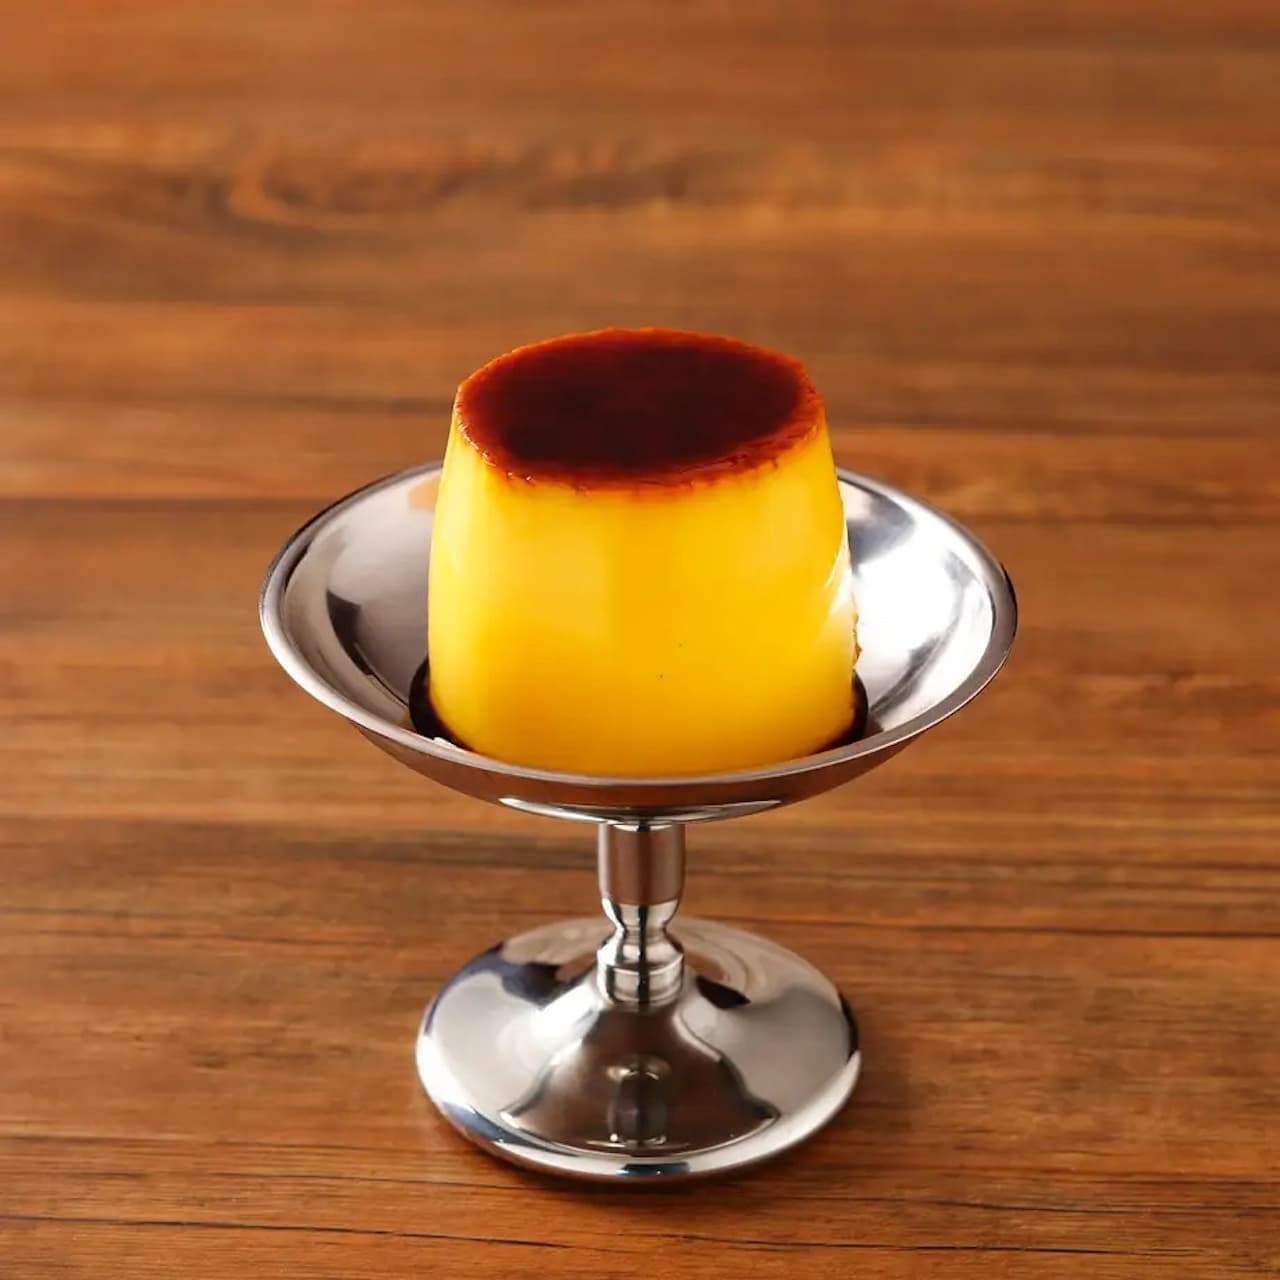 In Love with Pudding "Pumpkin Retro Pudding (120g)"